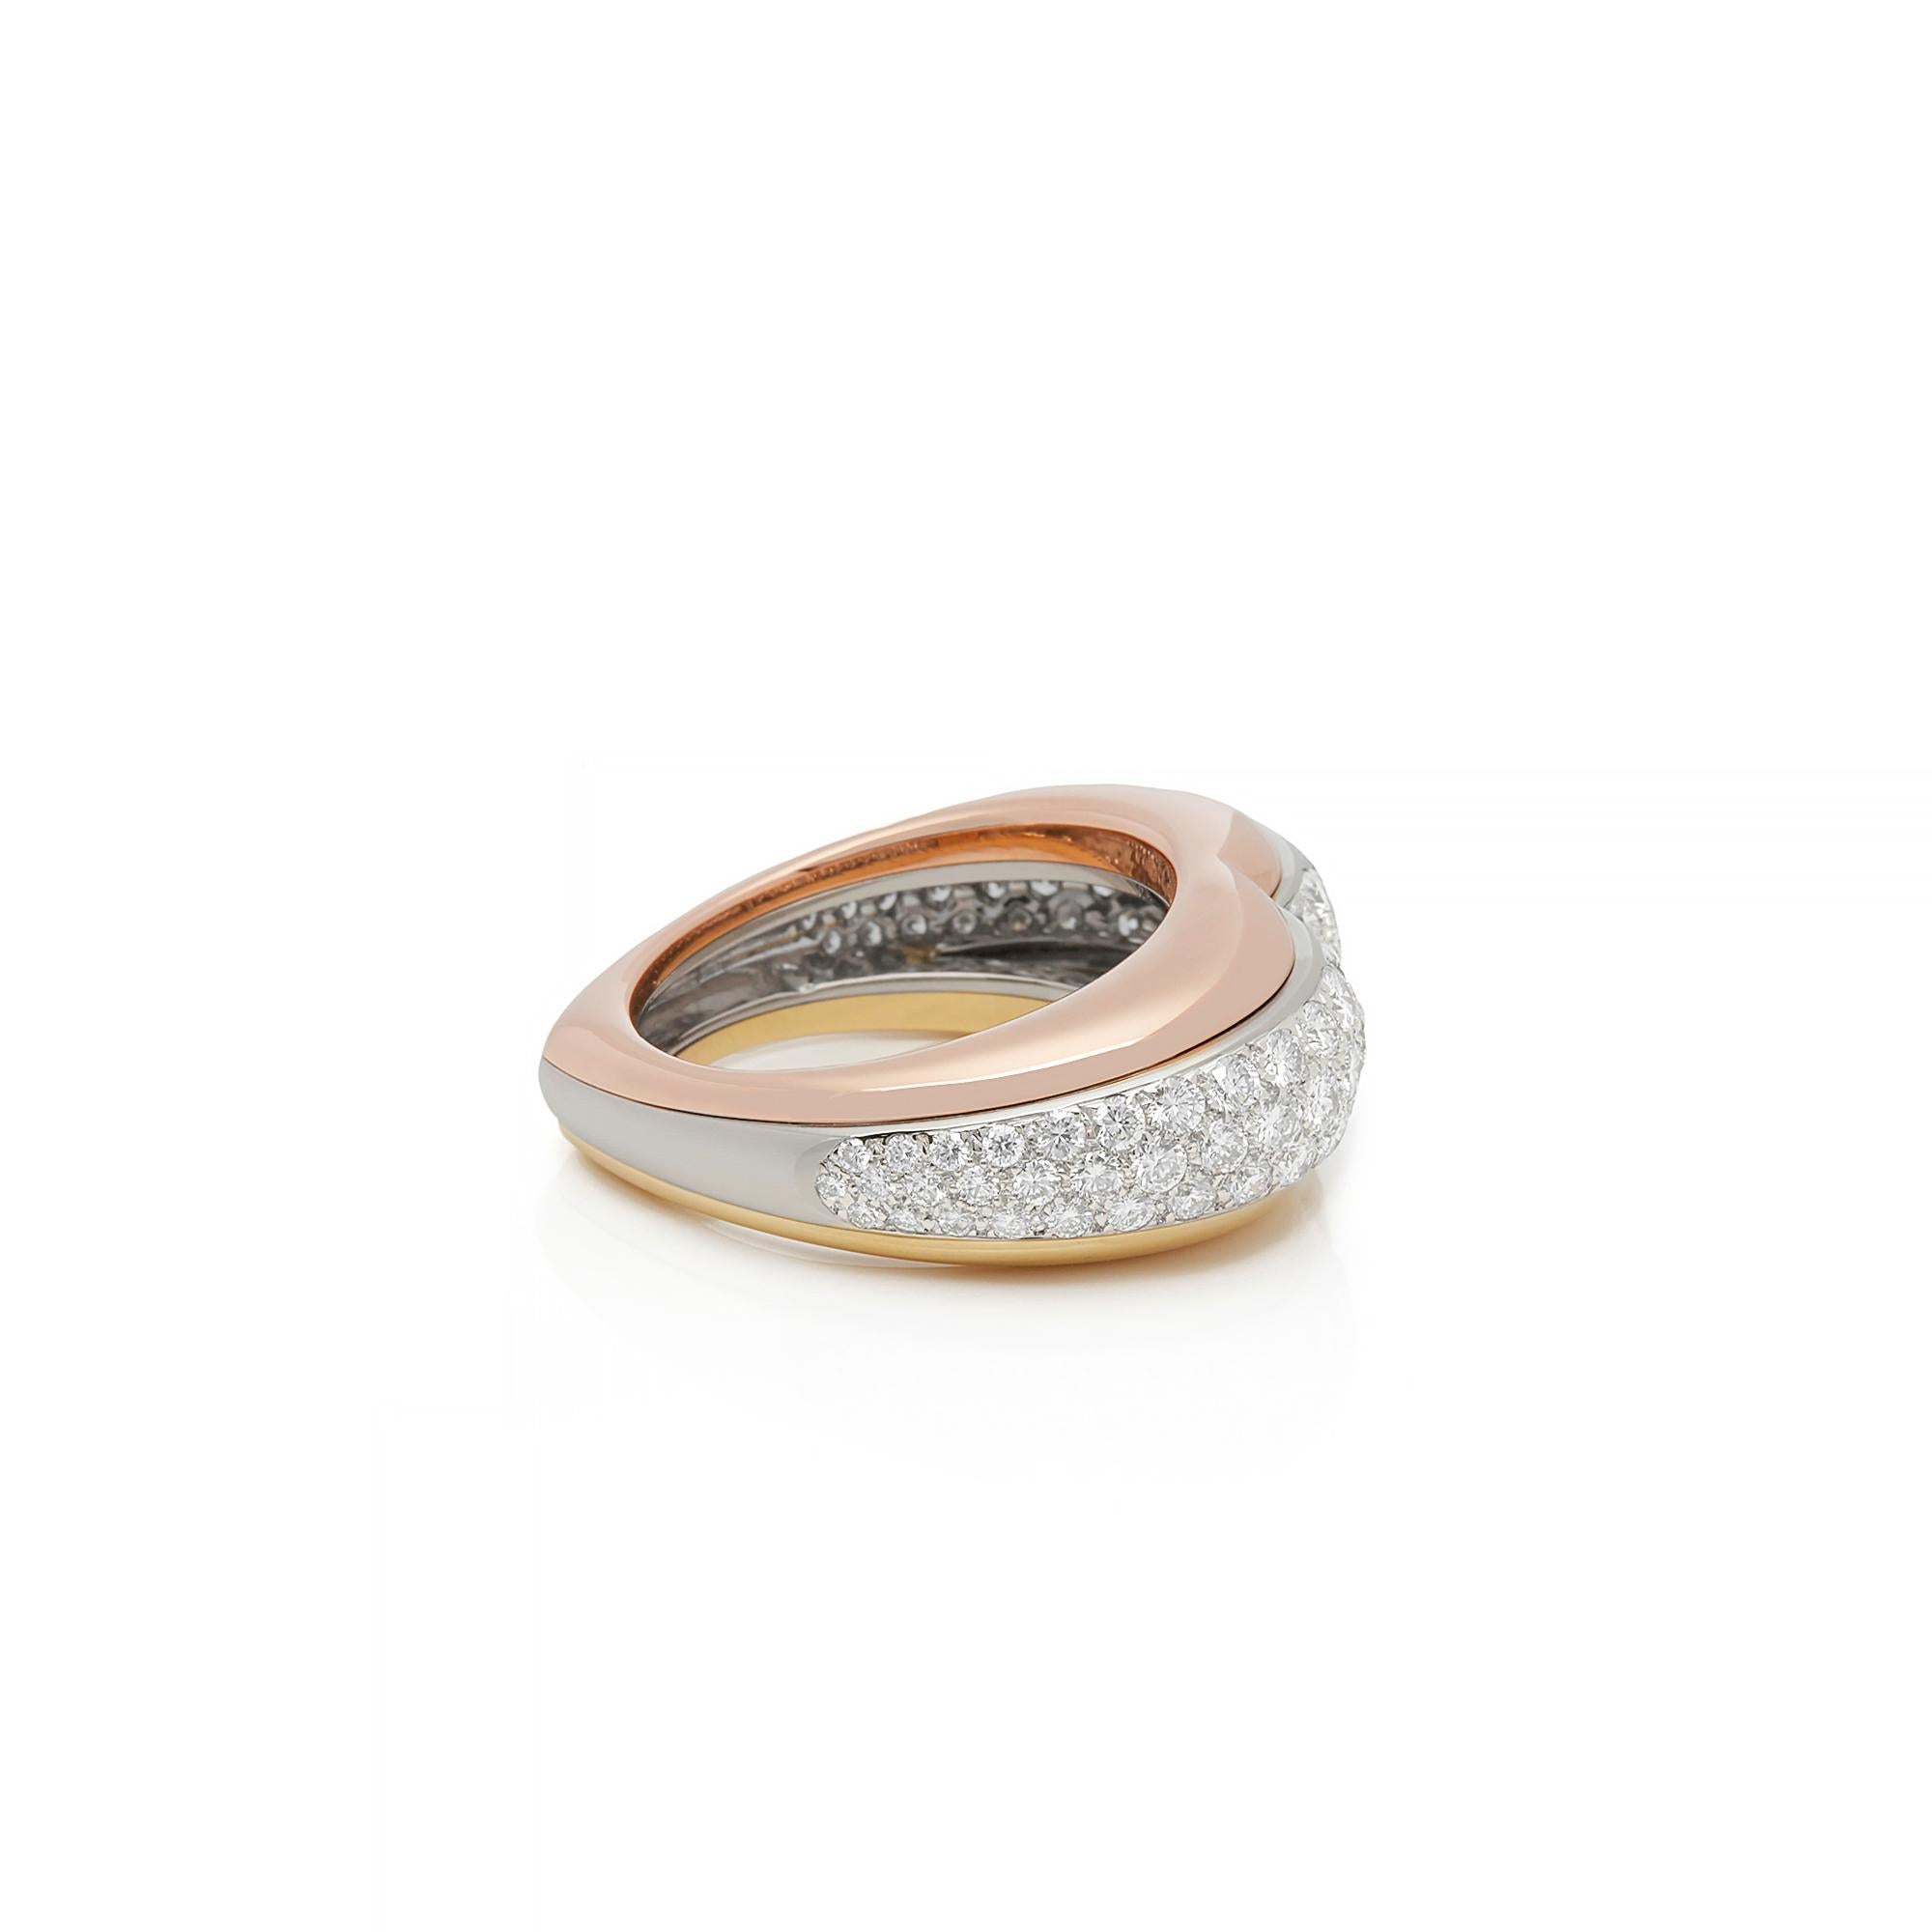 Round Cut Cartier 18k Yellow, White and Rose Gold Diamond Heart Shaped Ring